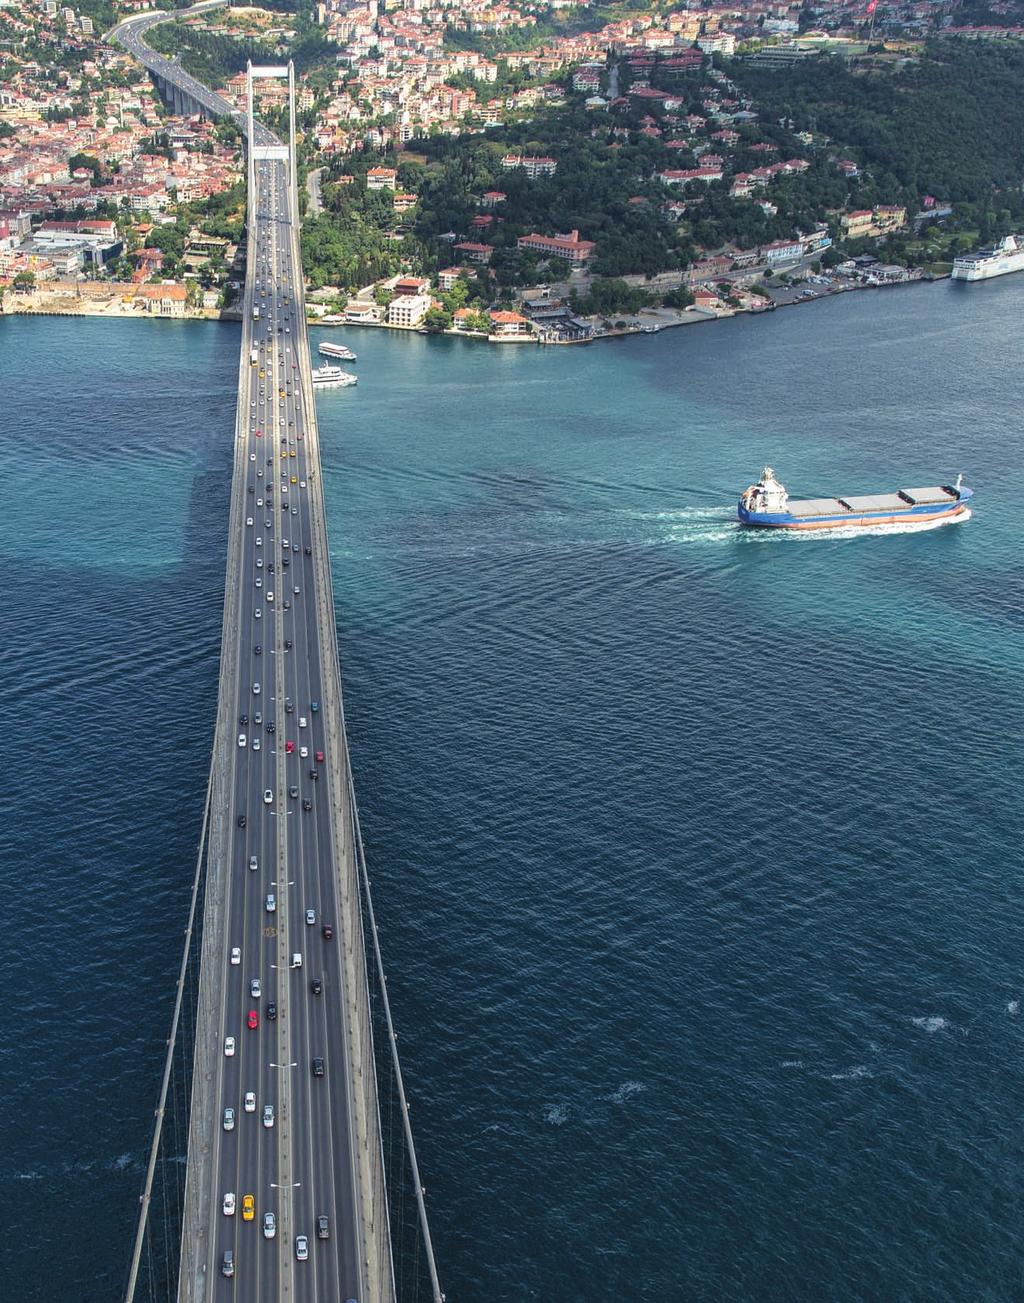 Bridging the Turkey-EU divide Part 2 What is motivating ties